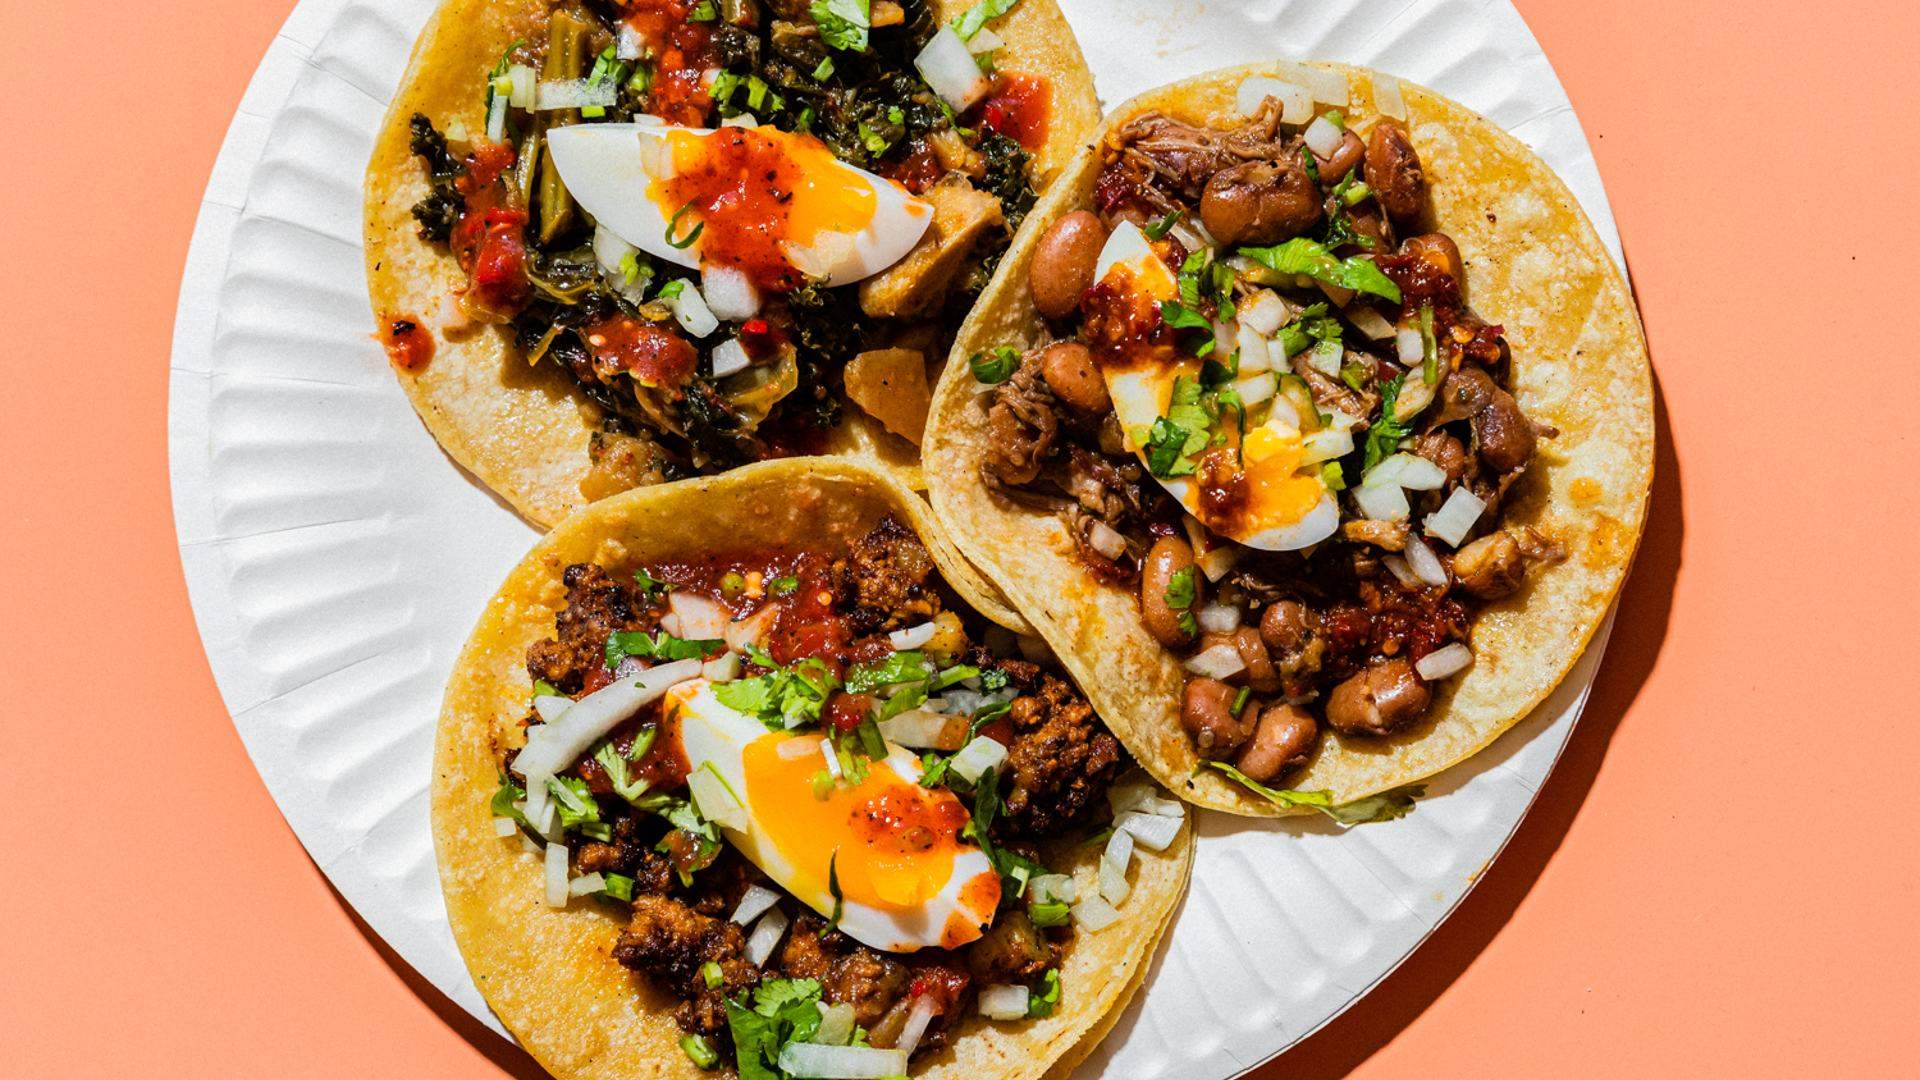 Sydney Favourite Ricos Tacos Has Opened Its First Bricks-and-Mortar Outpost in Chippendale